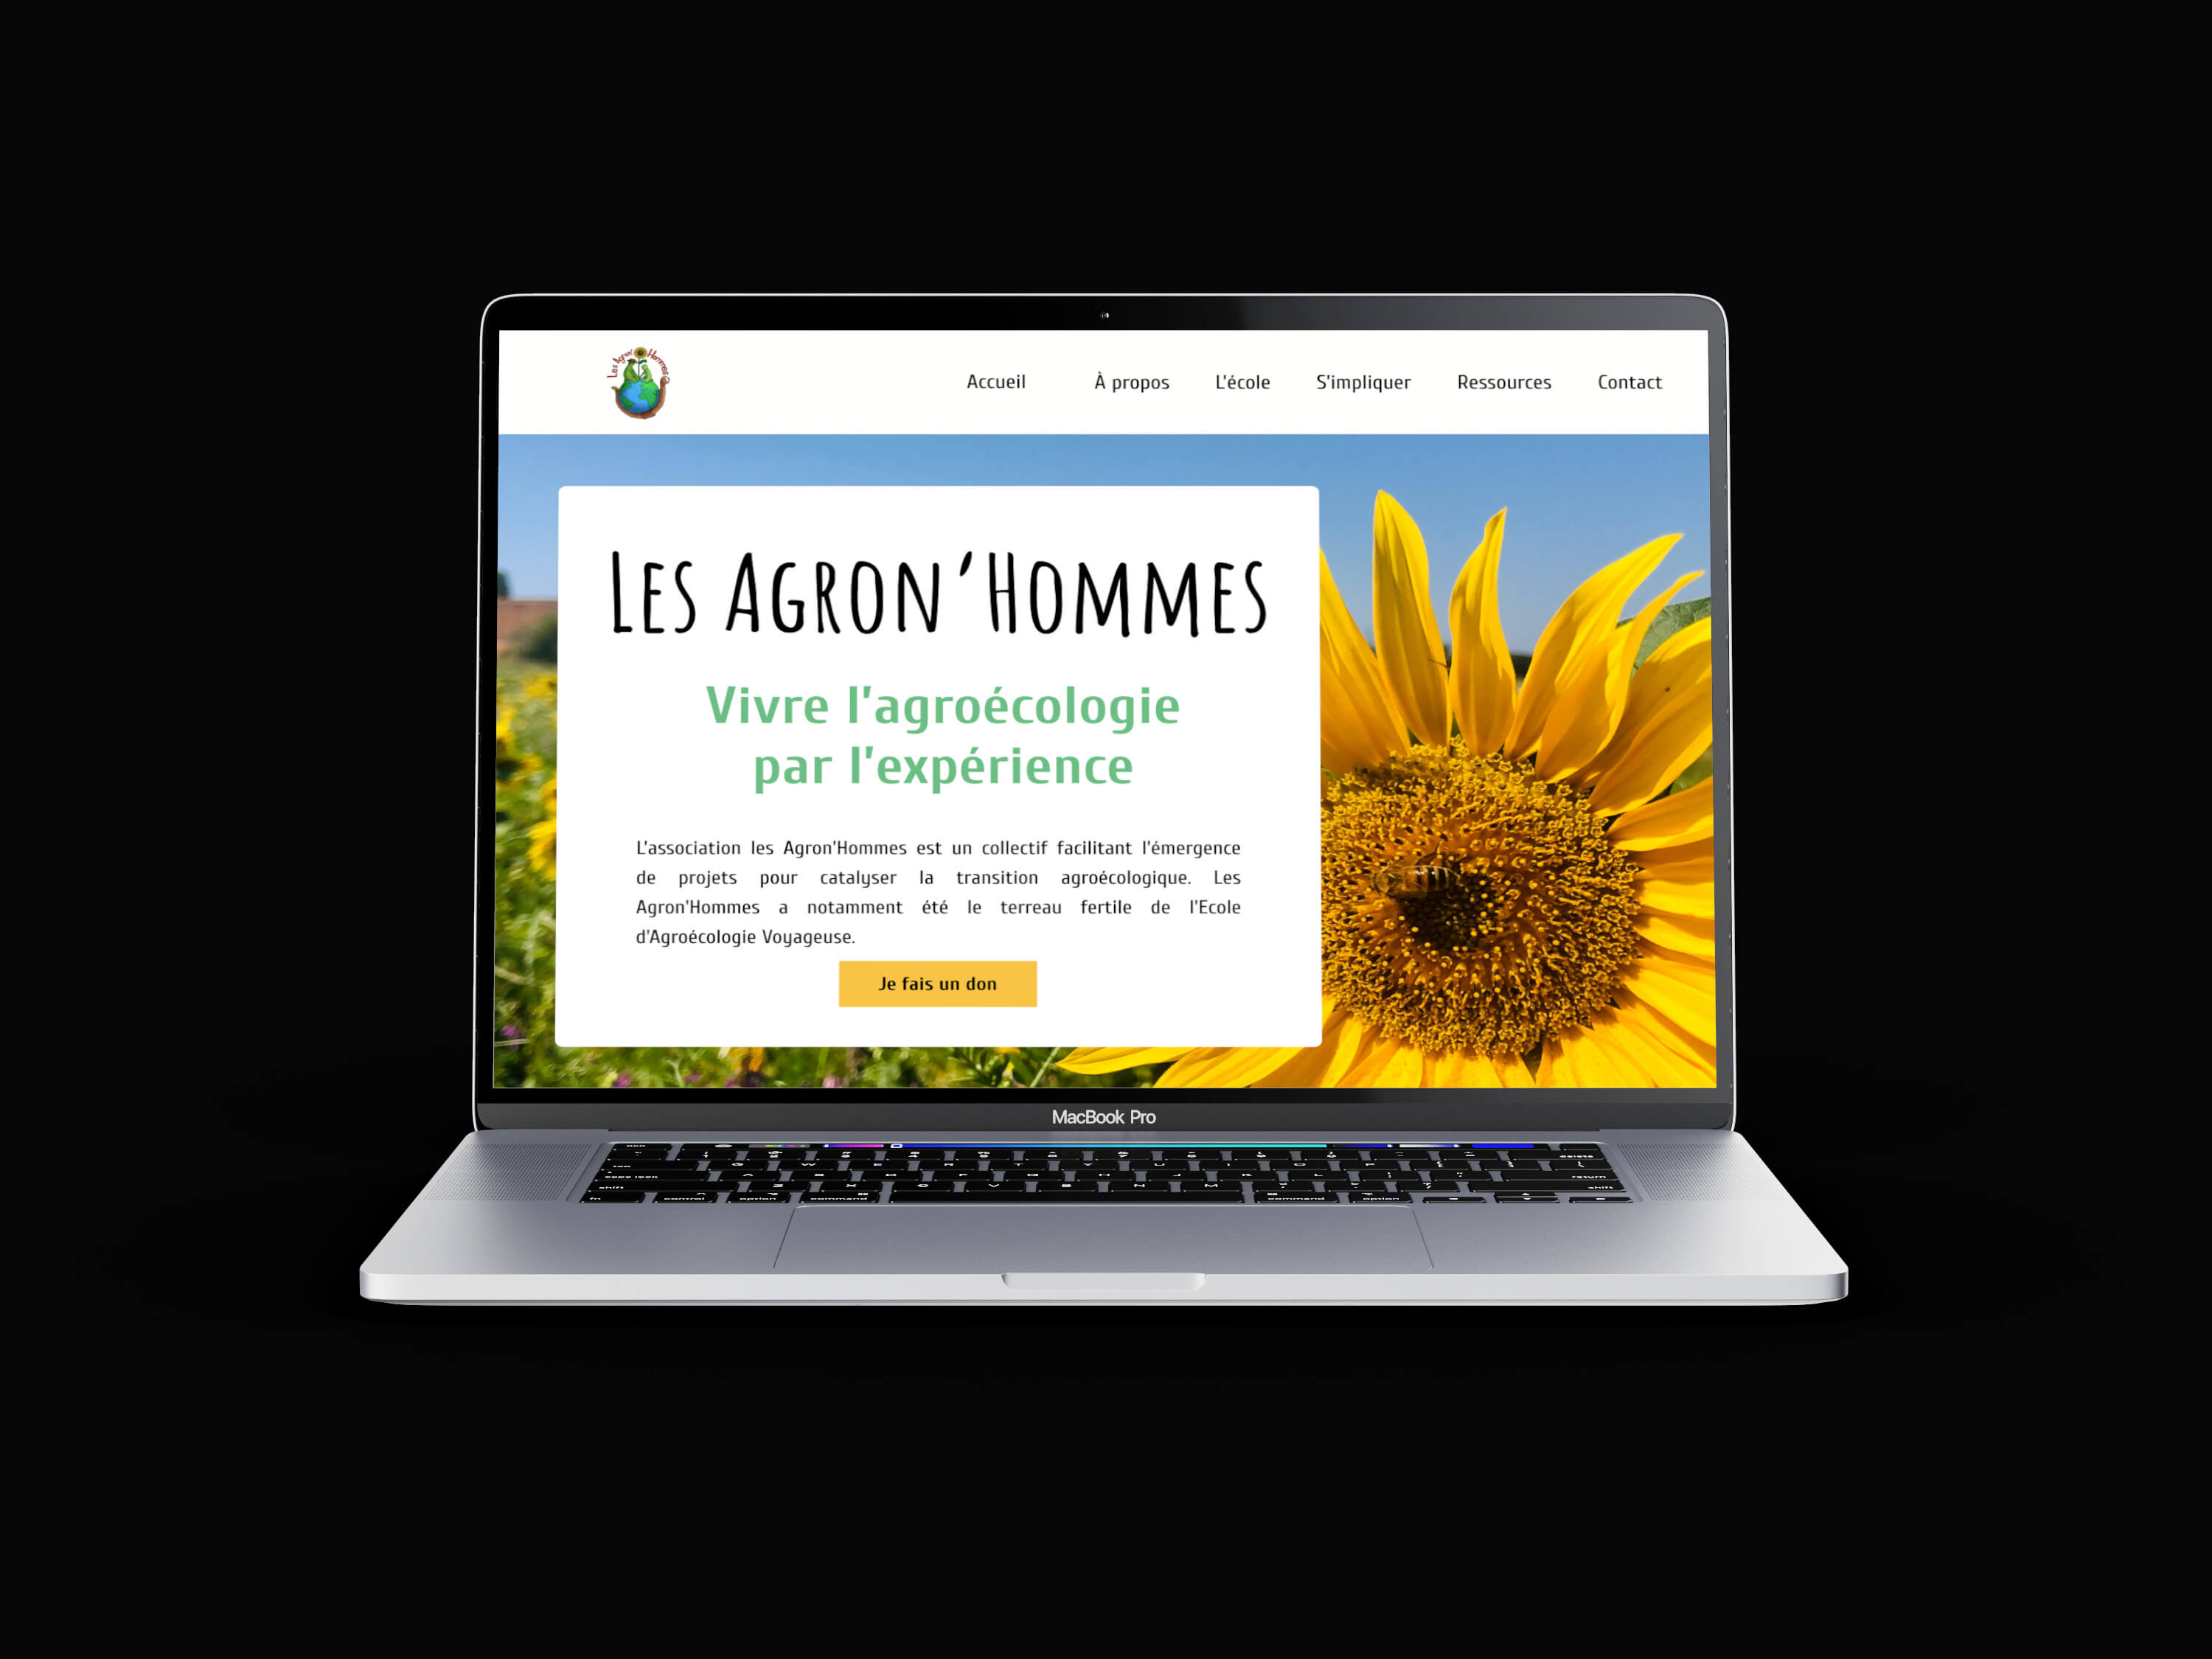 les agronhommes agroecology school and association website redesign